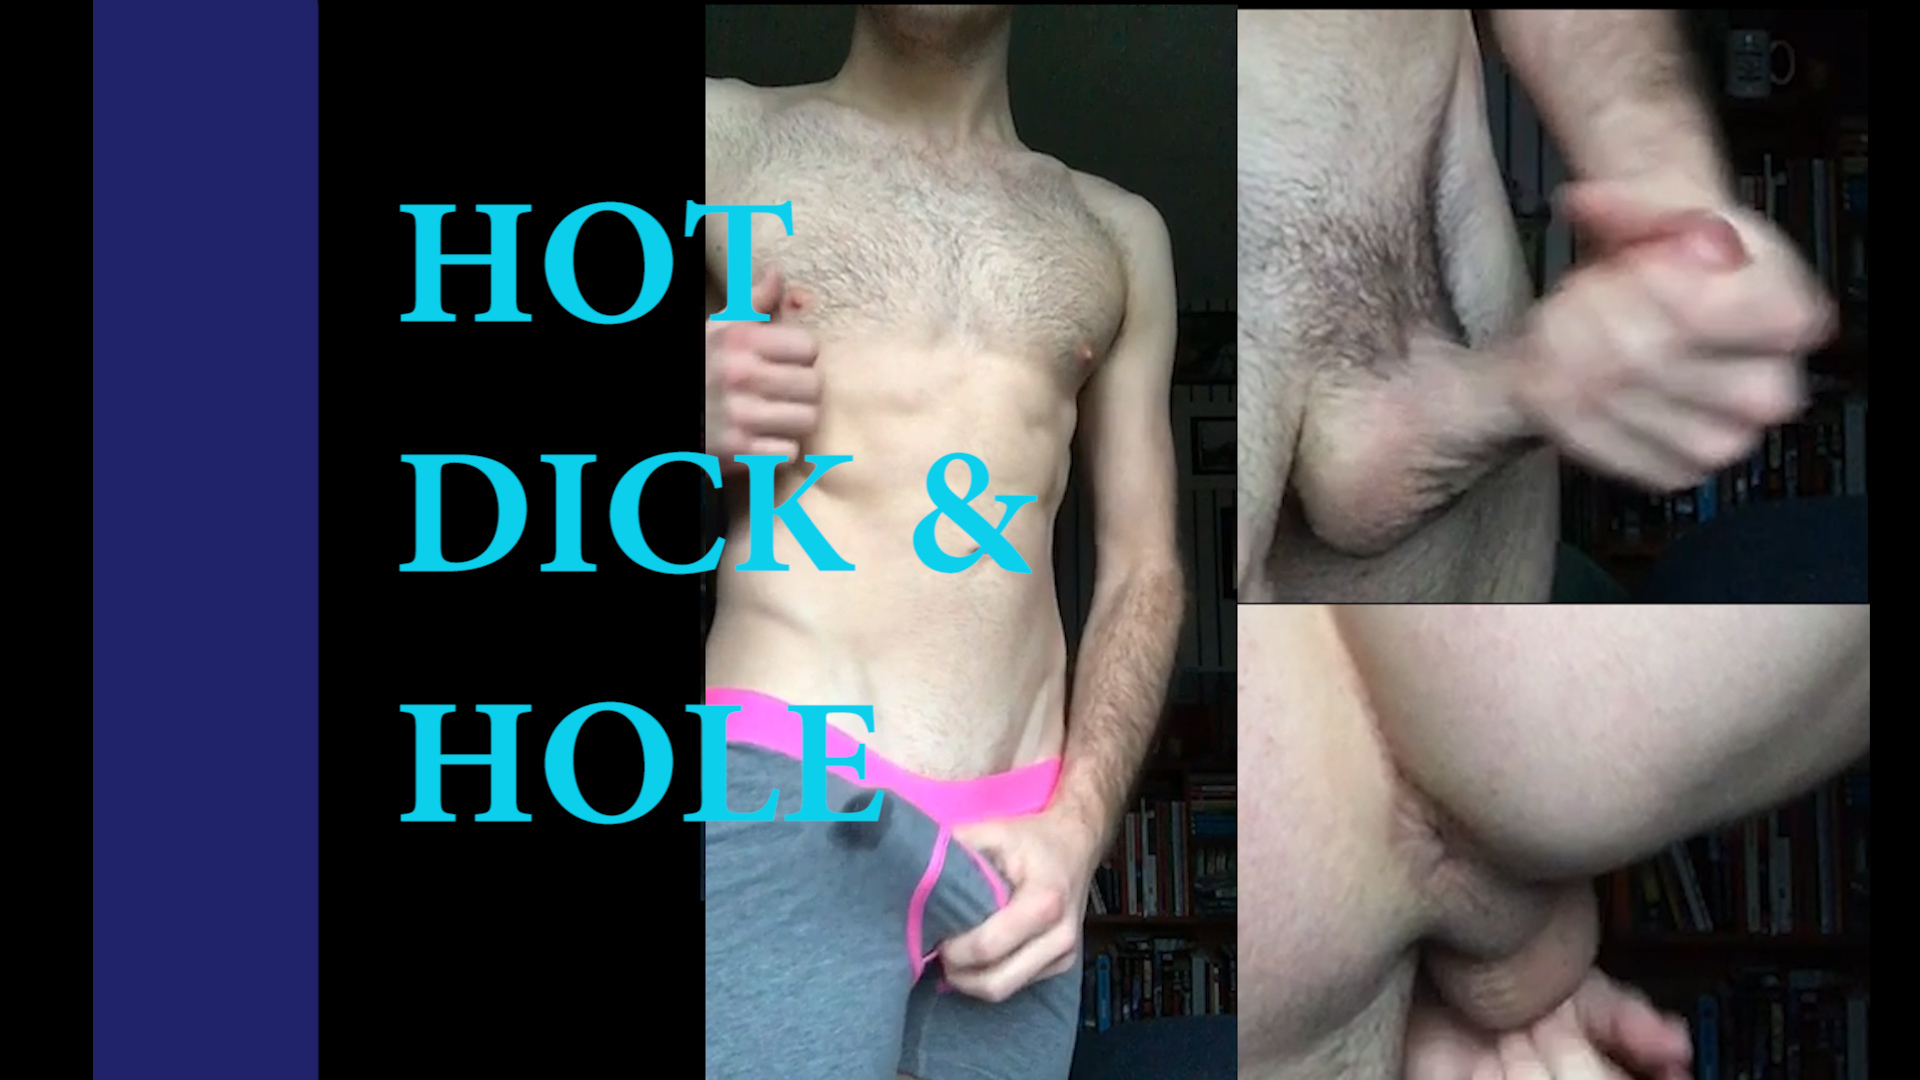 Showing hot dick and asshole